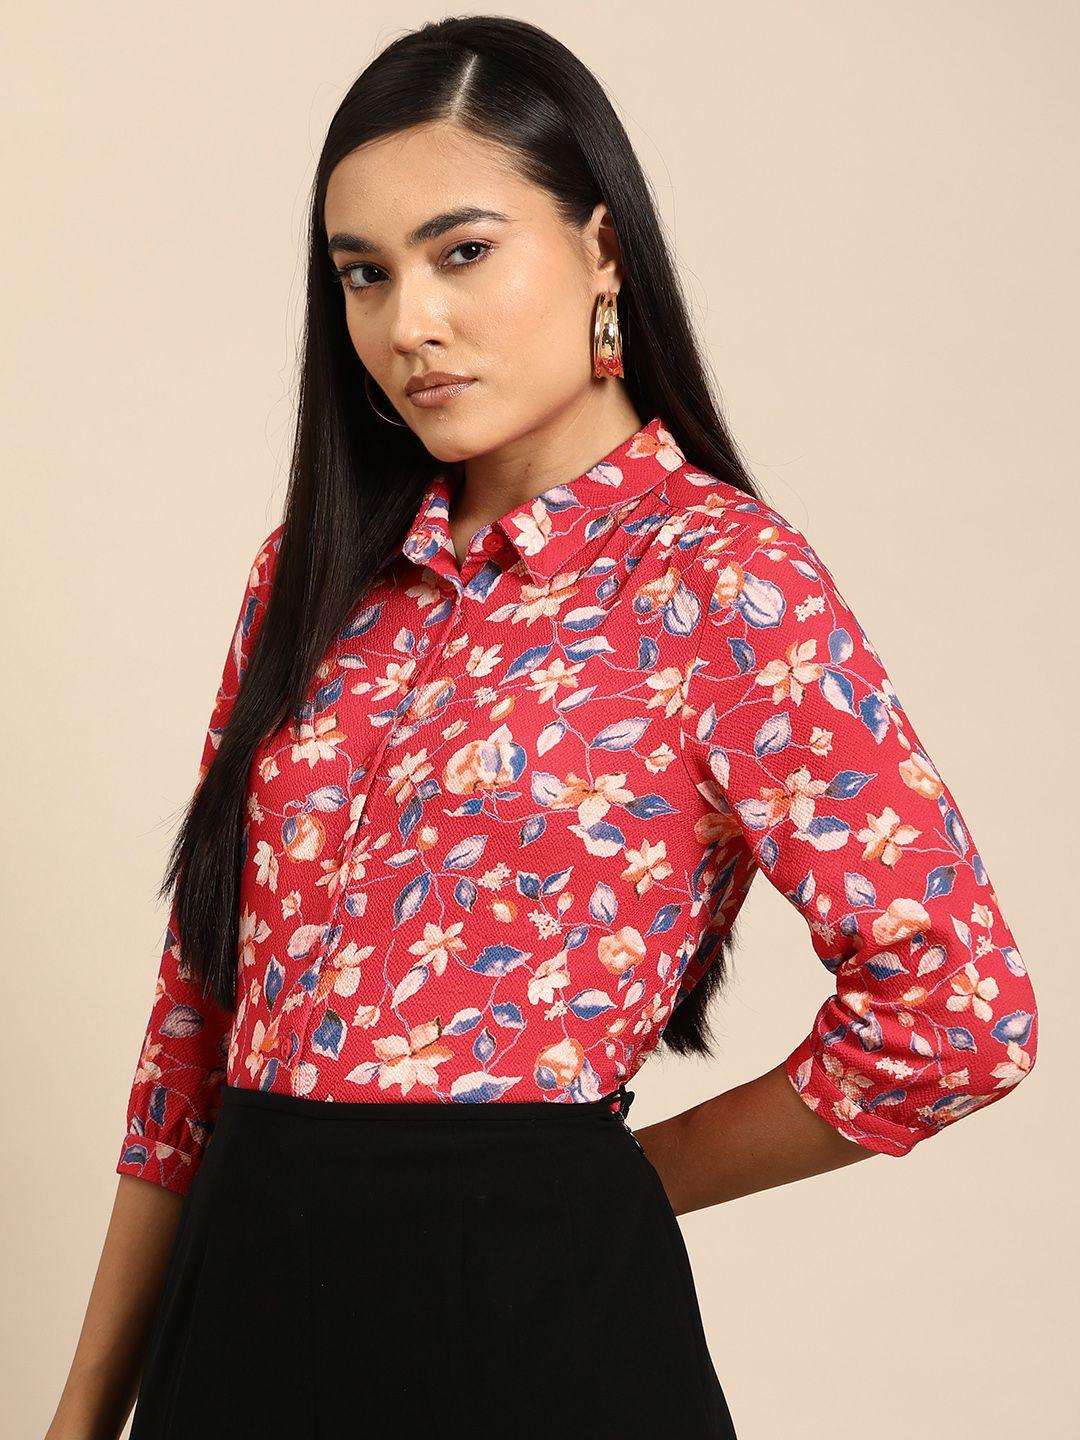 all about you floral opaque printed casual shirt